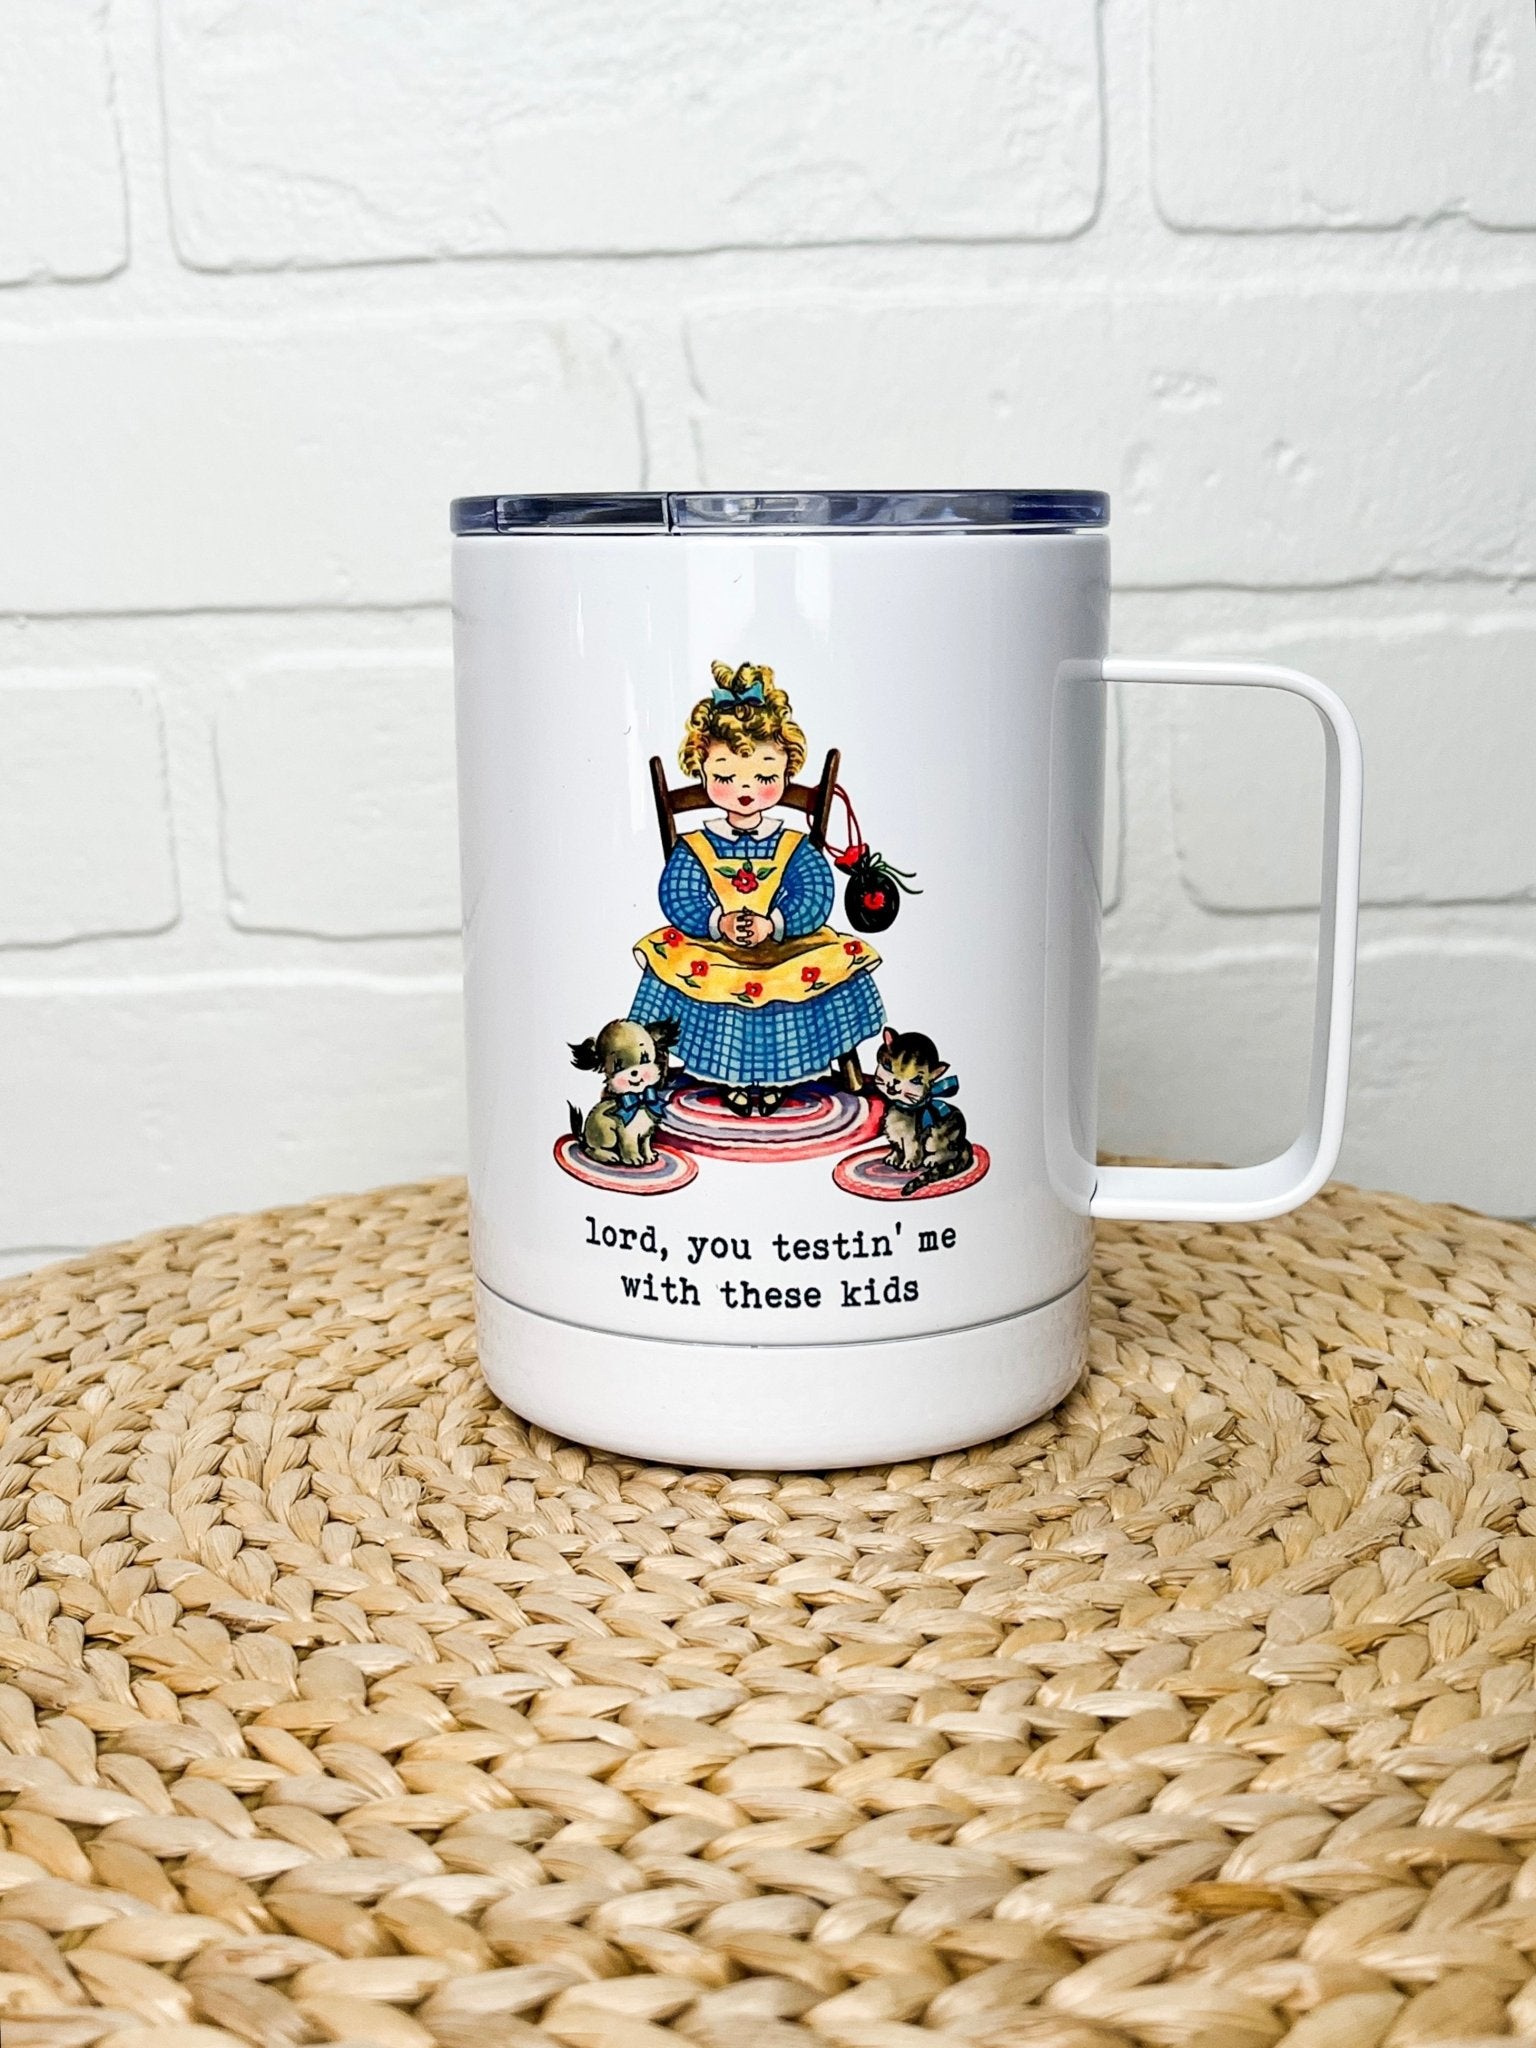 Mugsby Lord, you testin' me travel cup - Stylish travel cup - Trendy Gifts for Mom at Lush Fashion Lounge in Oklahoma